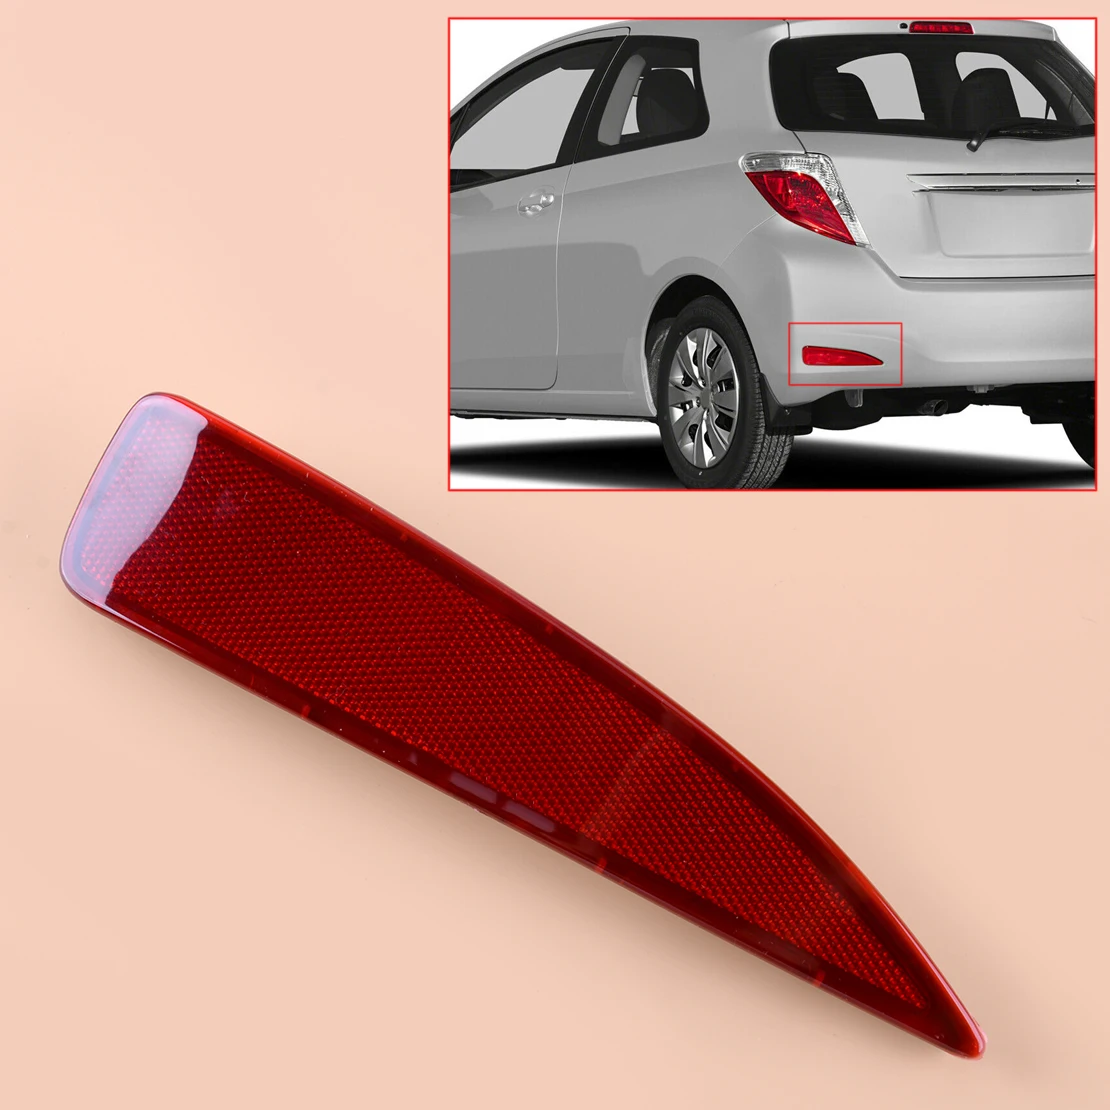 

Car Rear Bumper Left Reflector Light Lamp Housing Cover TO1184103 52164-52100 Fit For Toyota Yaris Base PREMIUM CE L LE 2012